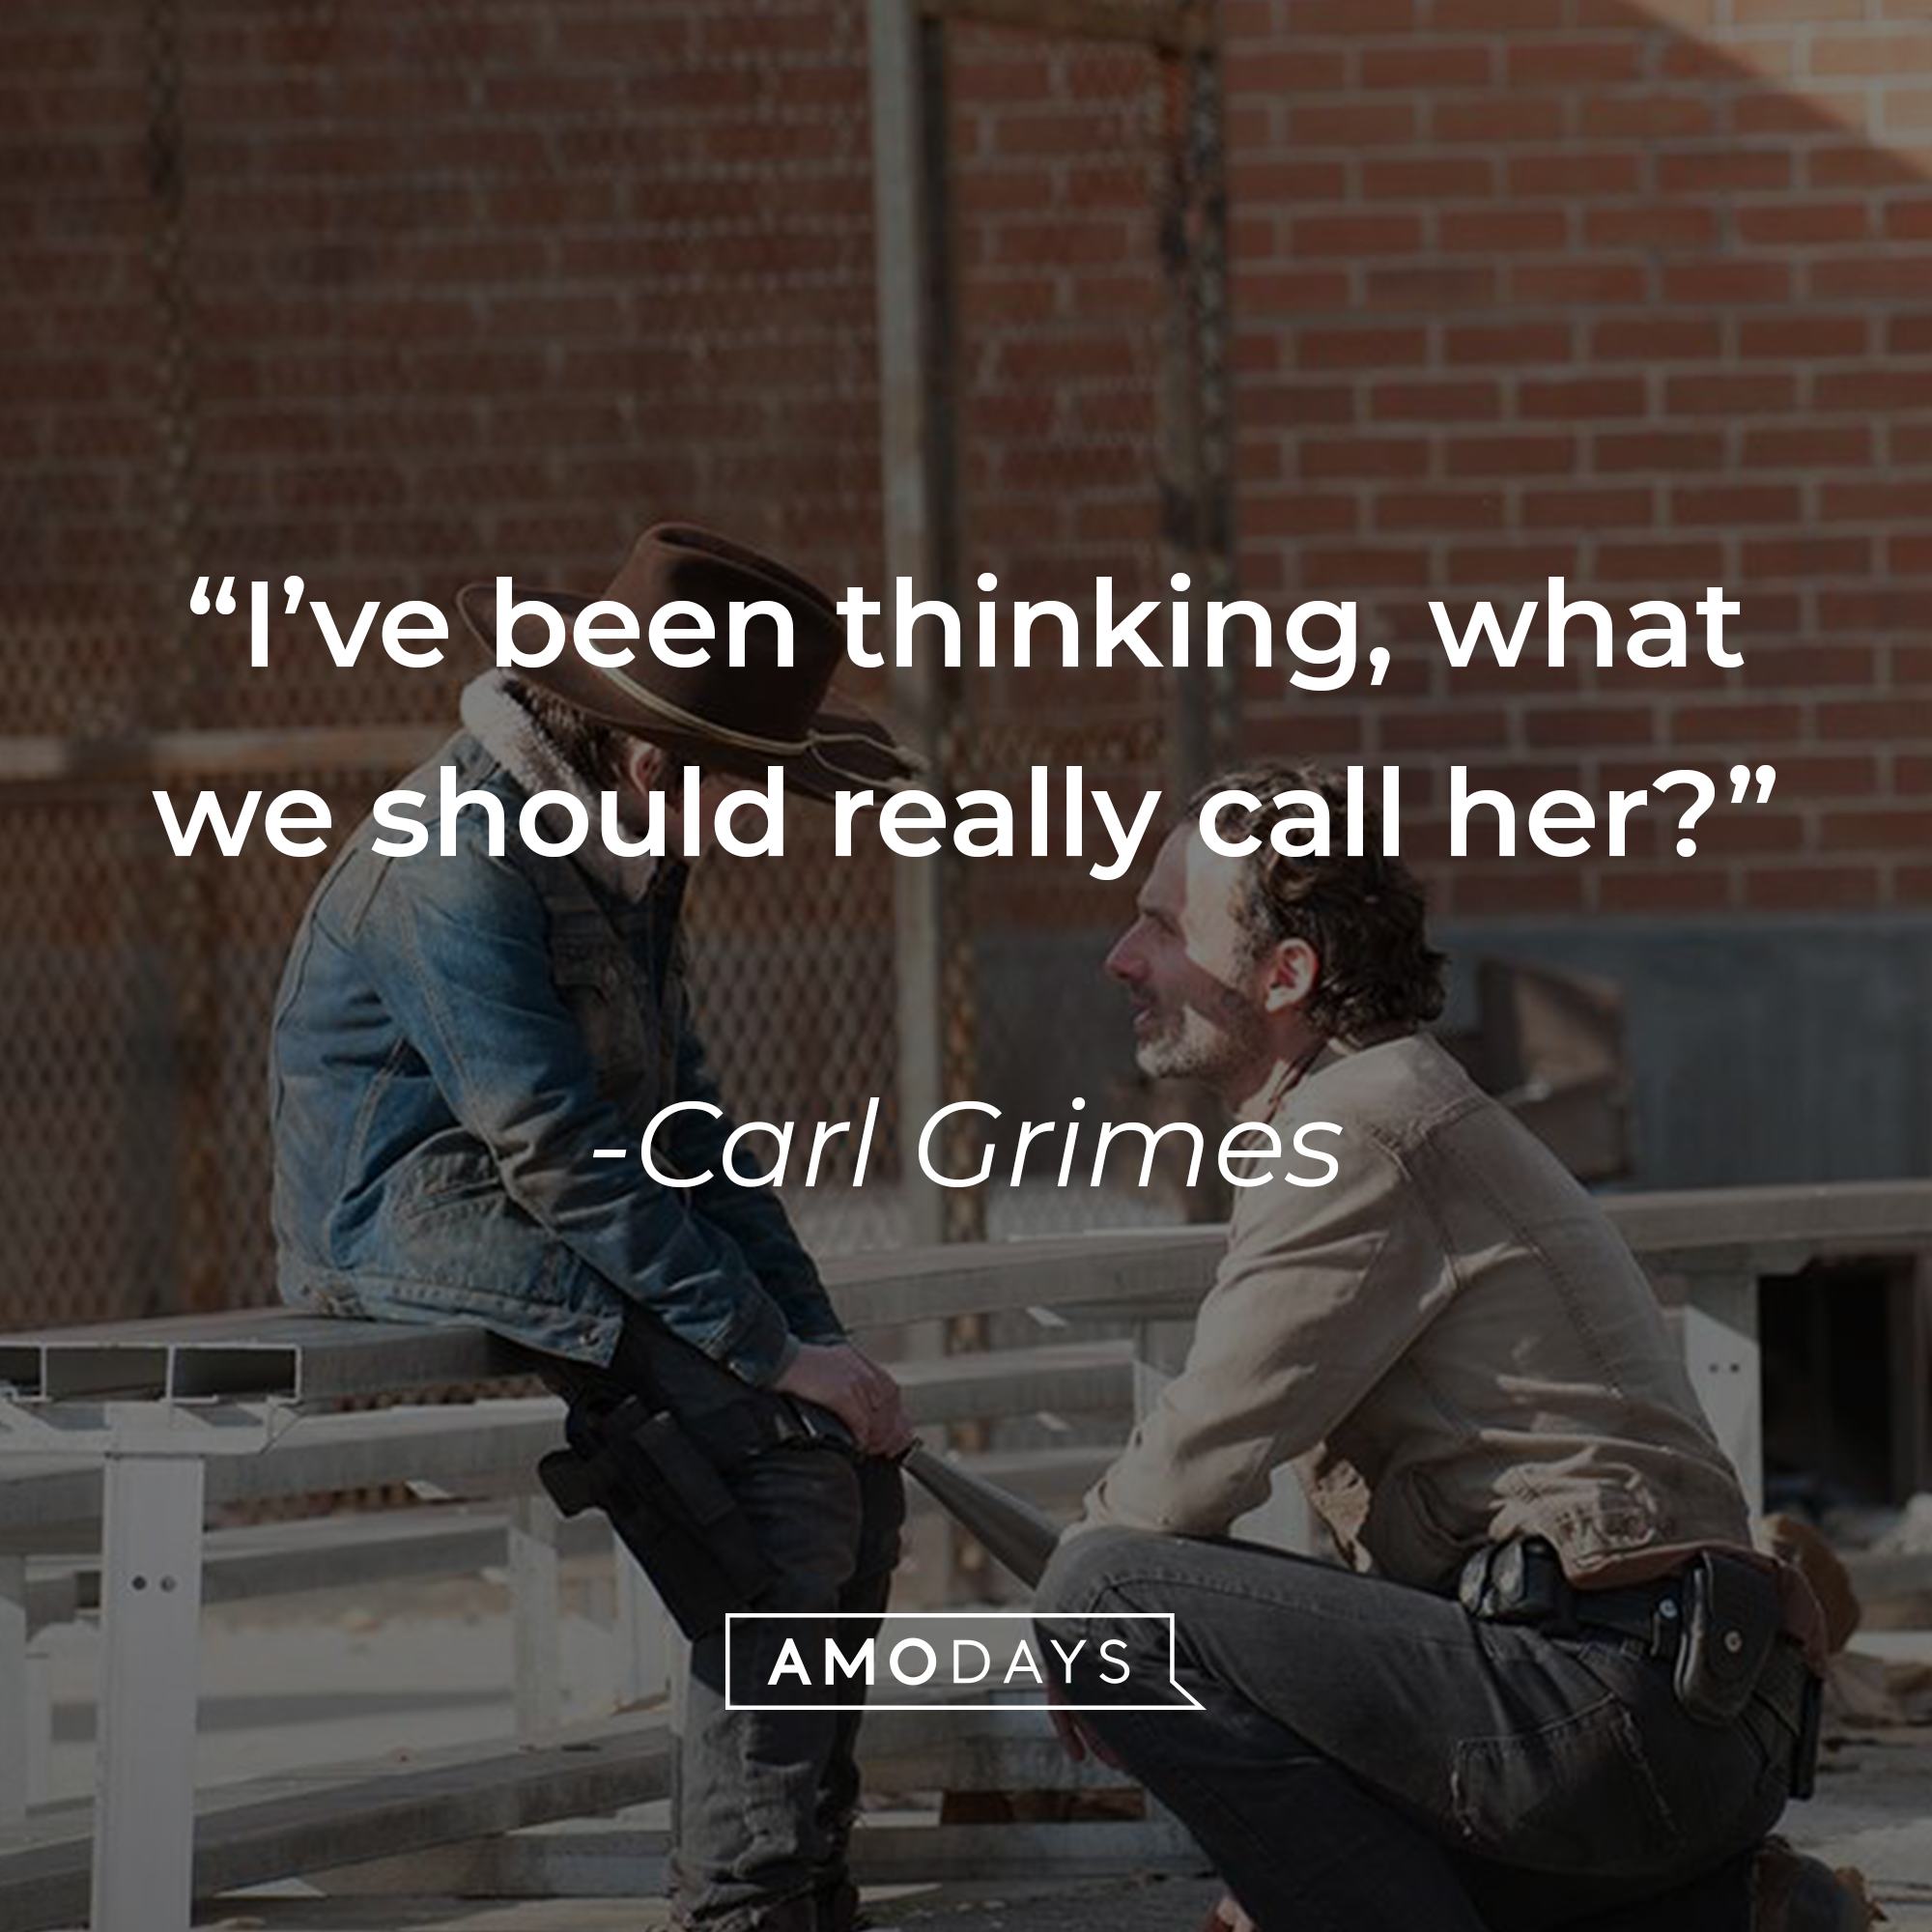 Carl Grimes and another character with Grines’ quote “I’ve been thinking, what we should really call her?” | Source: facebook.com/TheWalkingDeadAMC